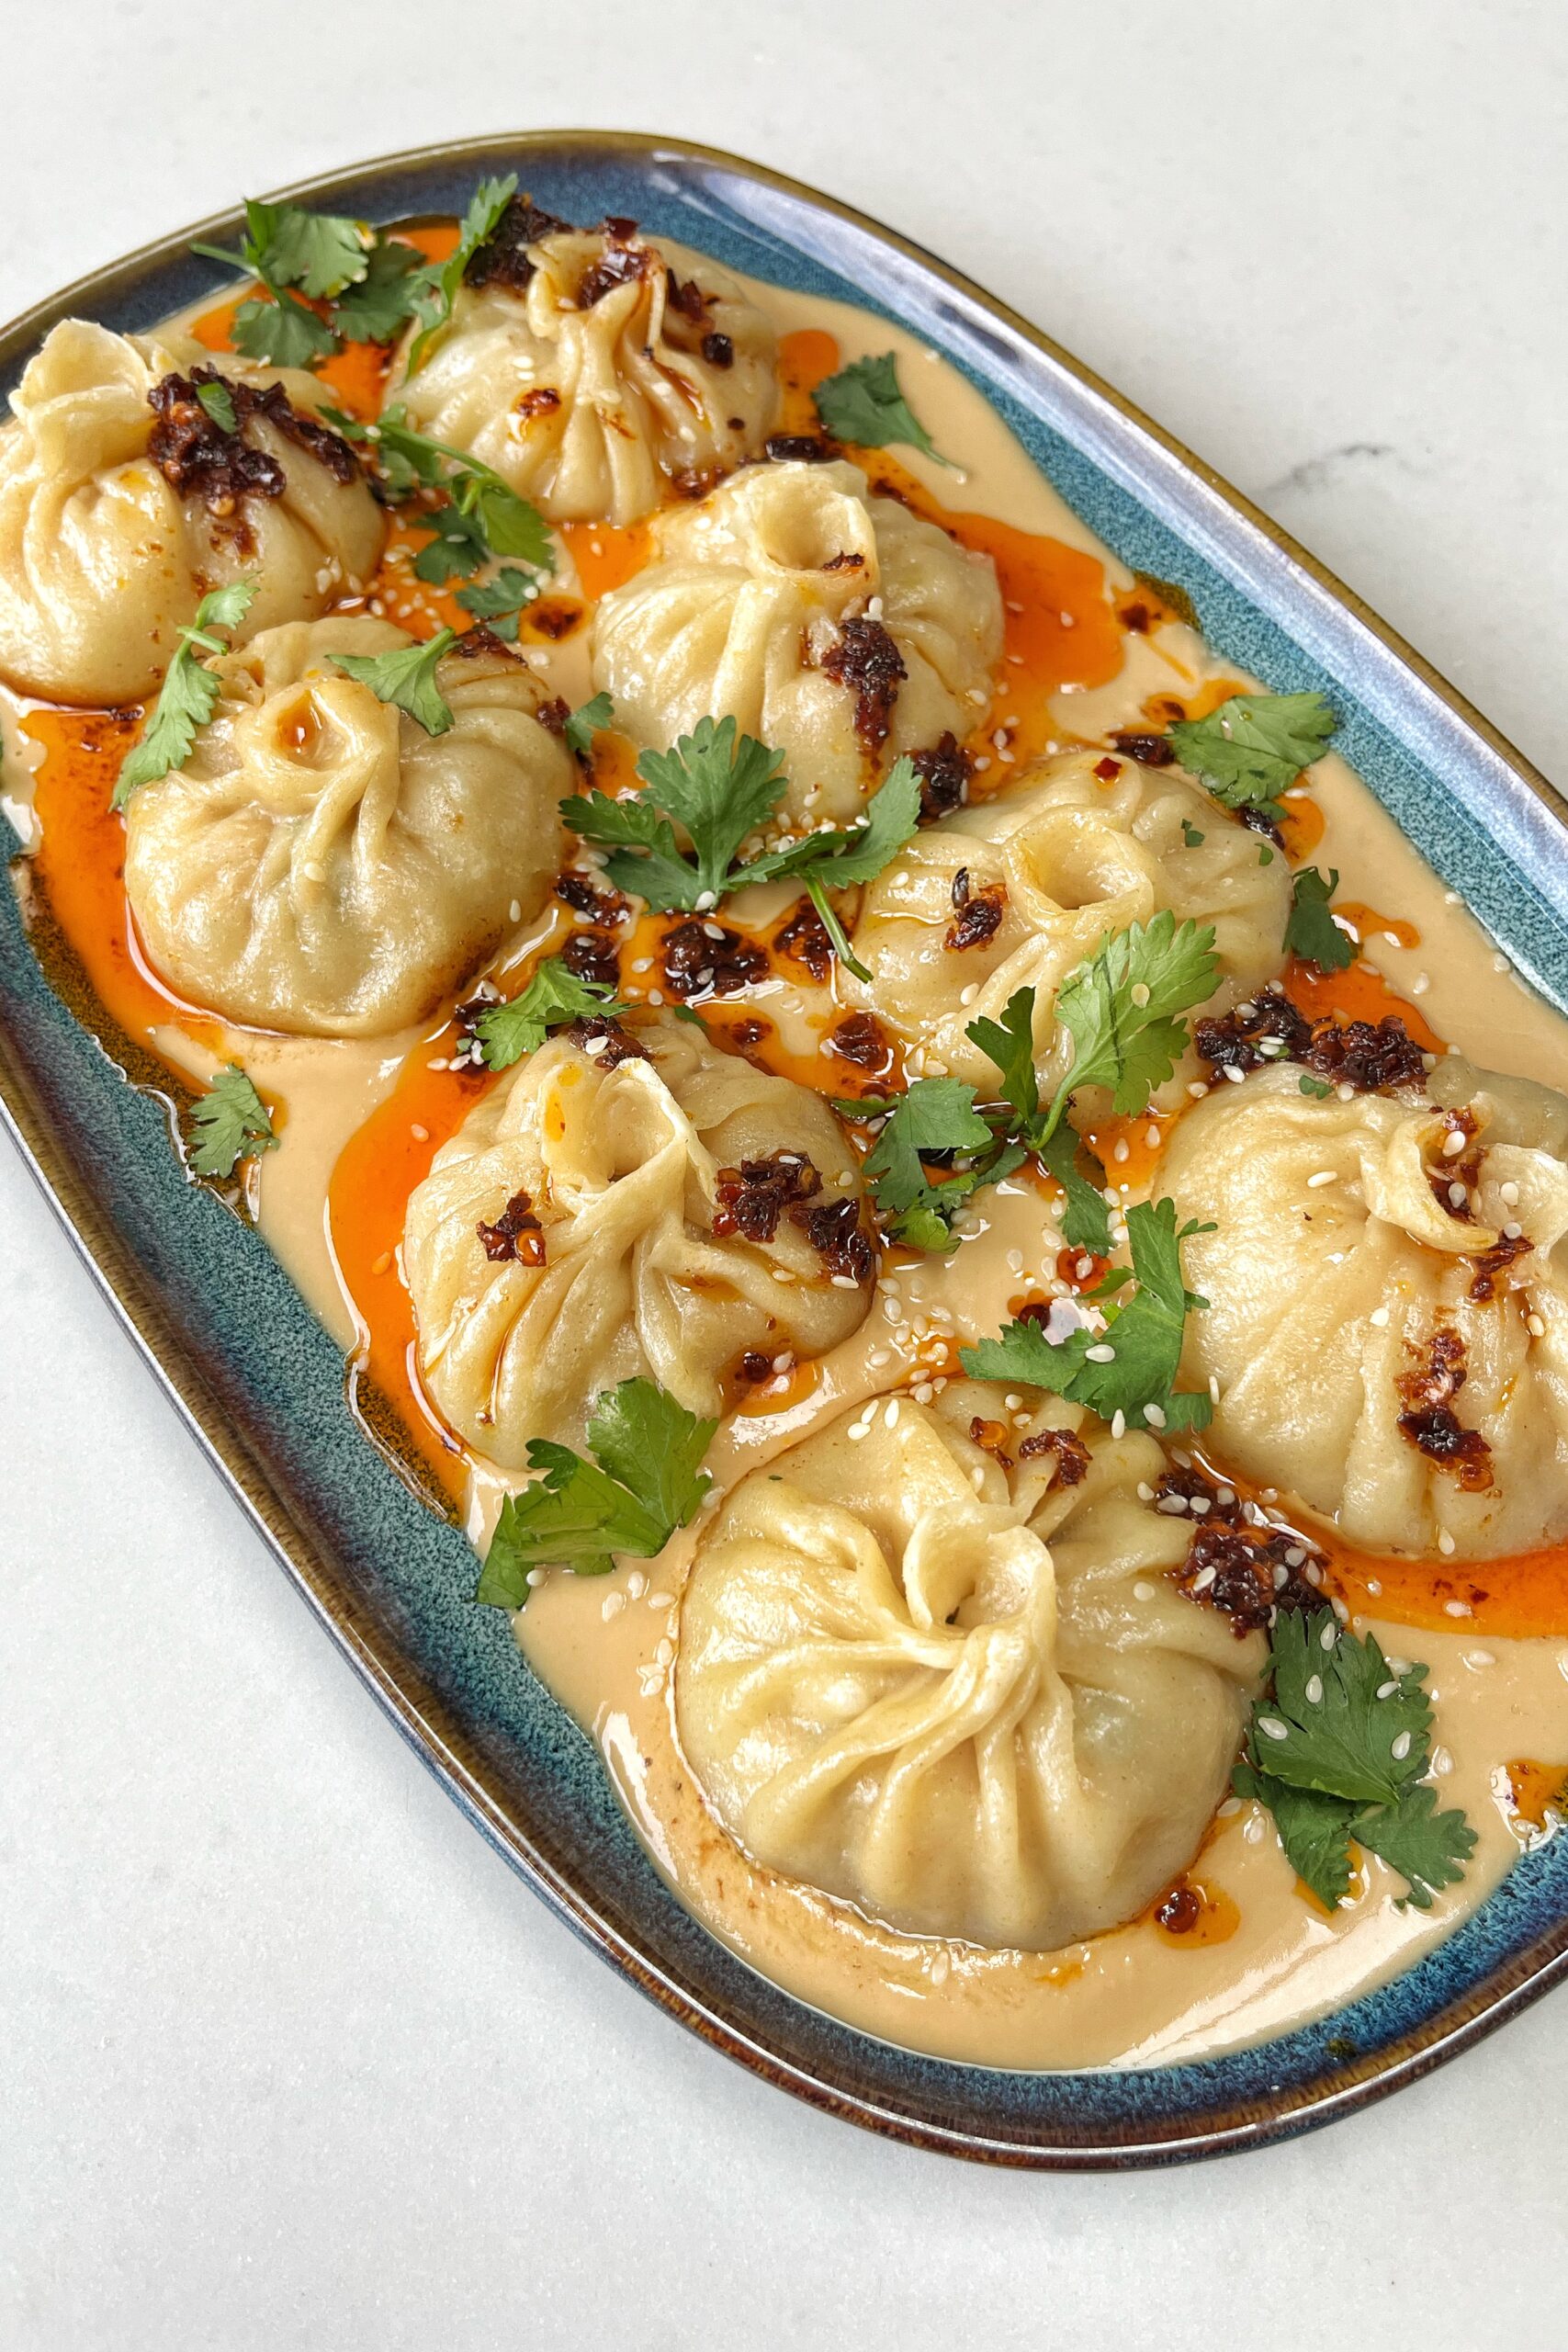 Chicken and pork dumplings on a bed of tahini chilli oil sauce